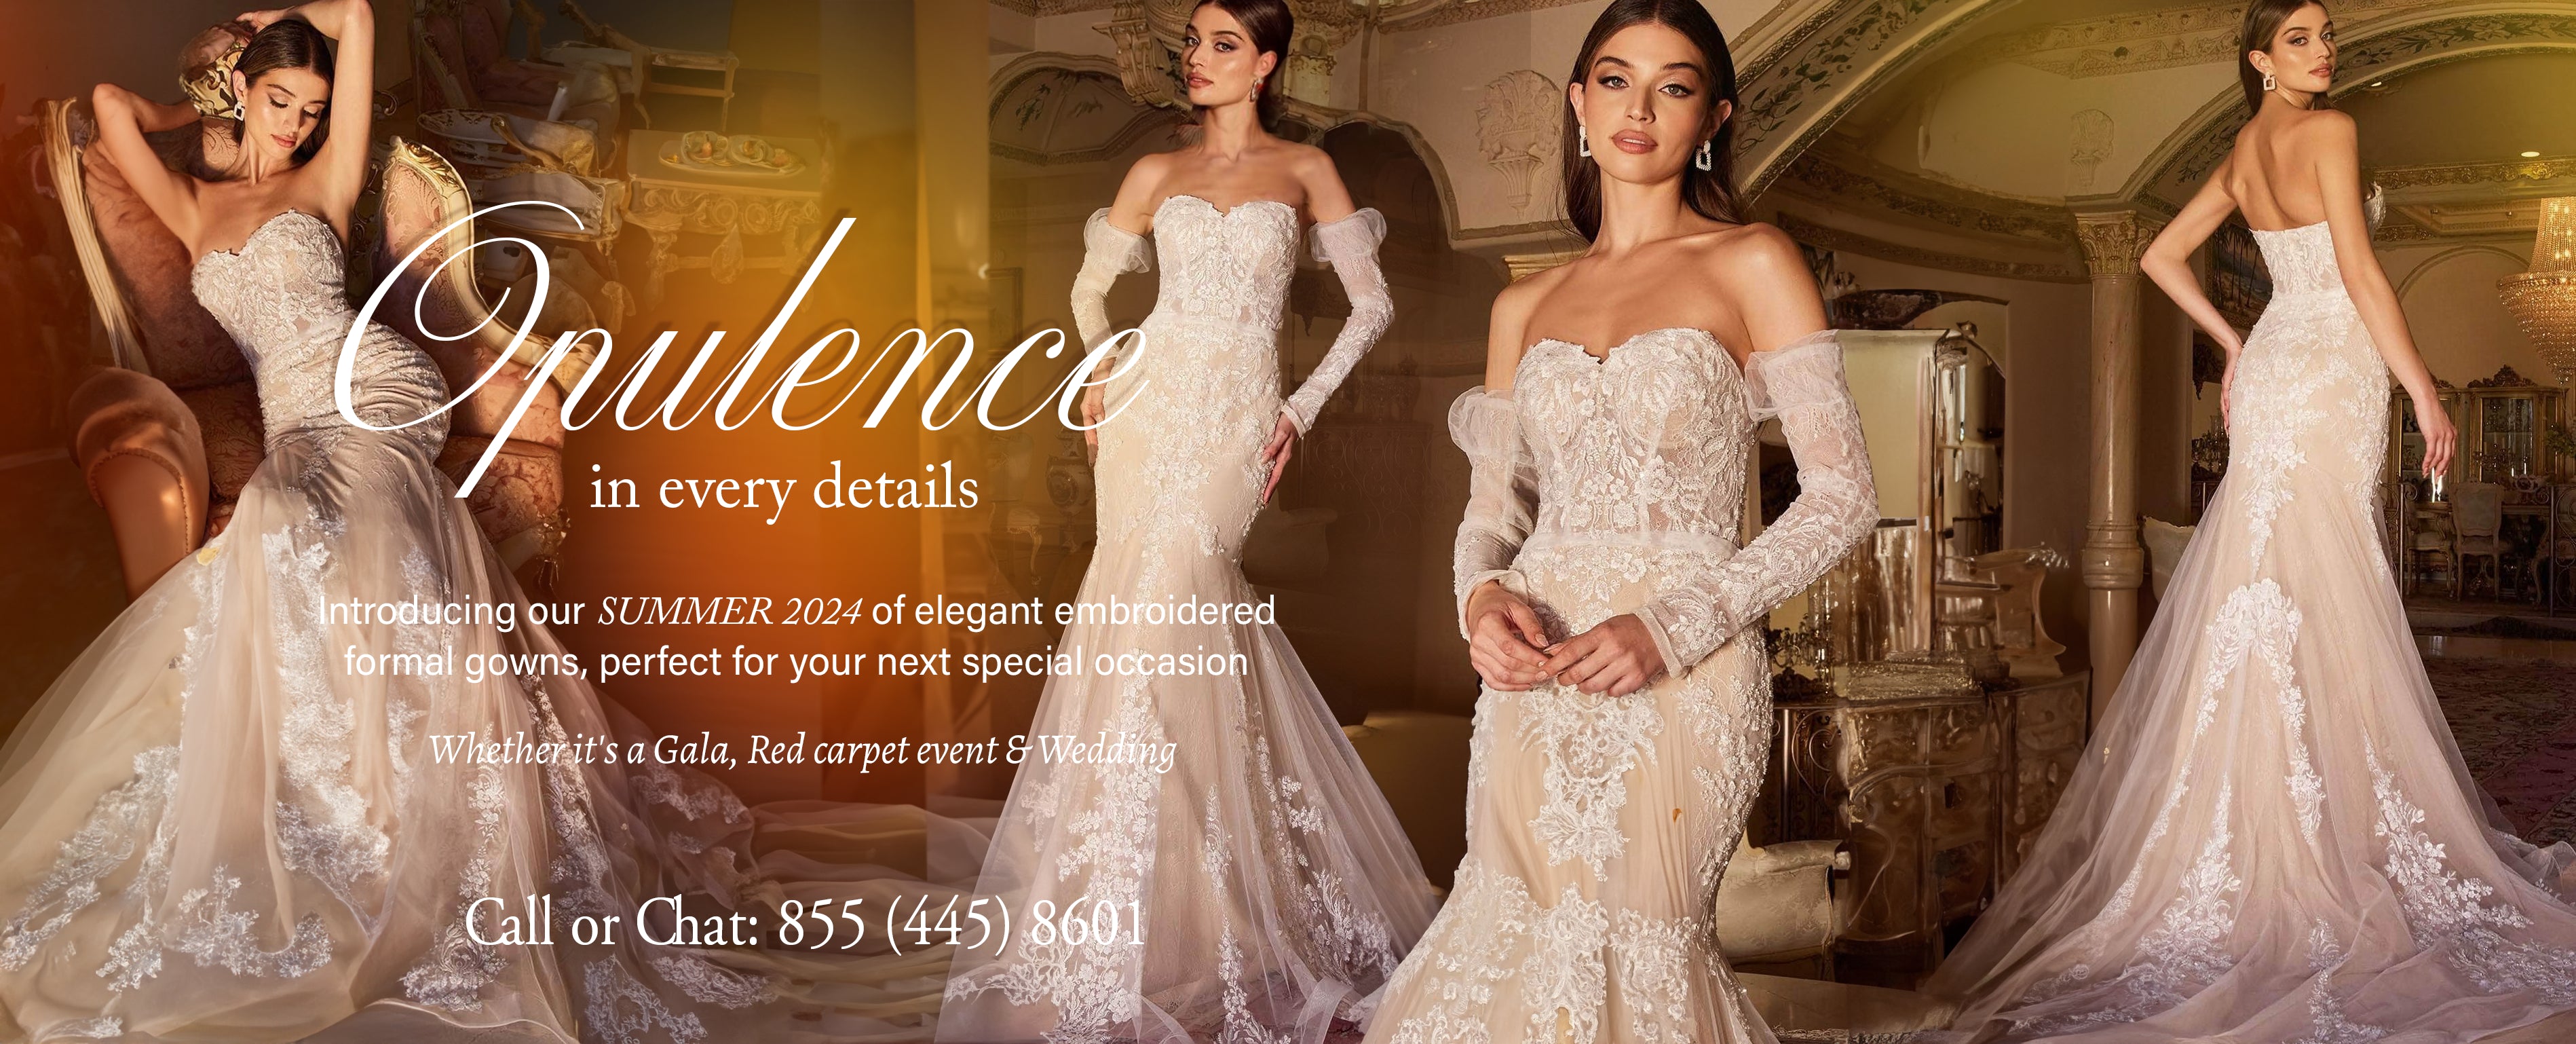 opulence-in-every-details-introducing-our-summer-2024-of-embroidered-formal-gowns-perfect-for-you-next-special-occasion